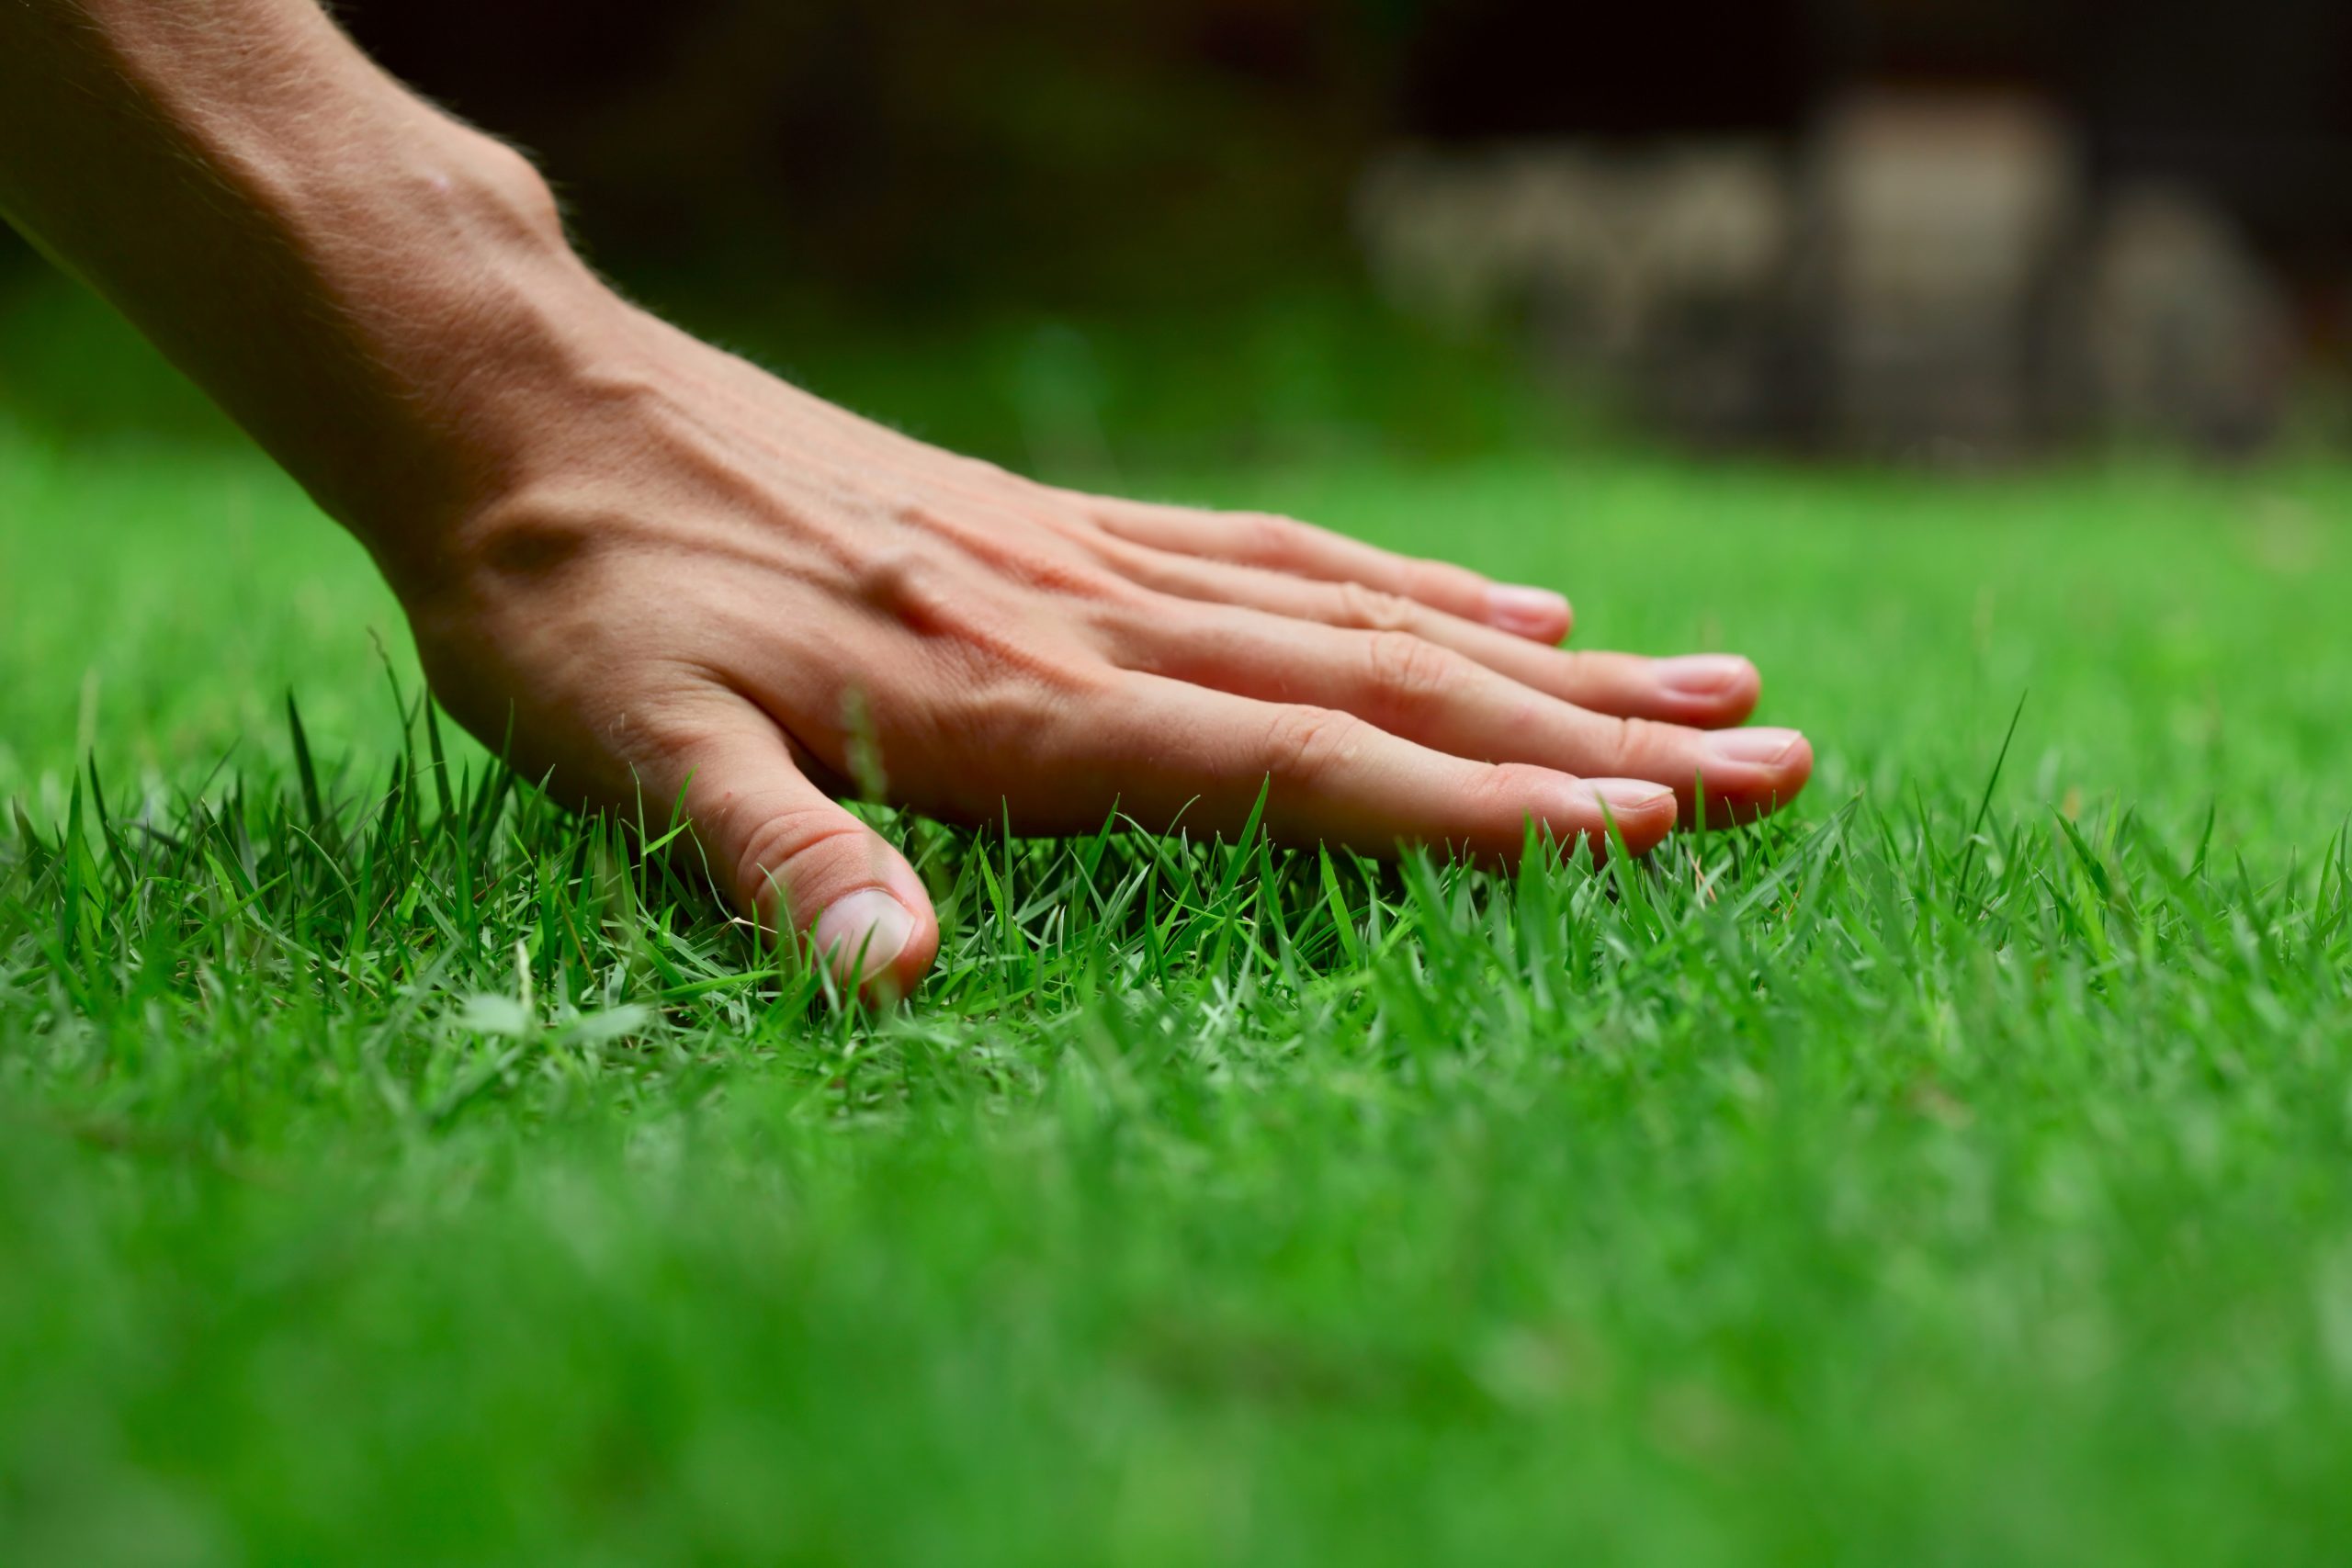 Lawn Care: What Do I Need To Do With My Lawn in June?